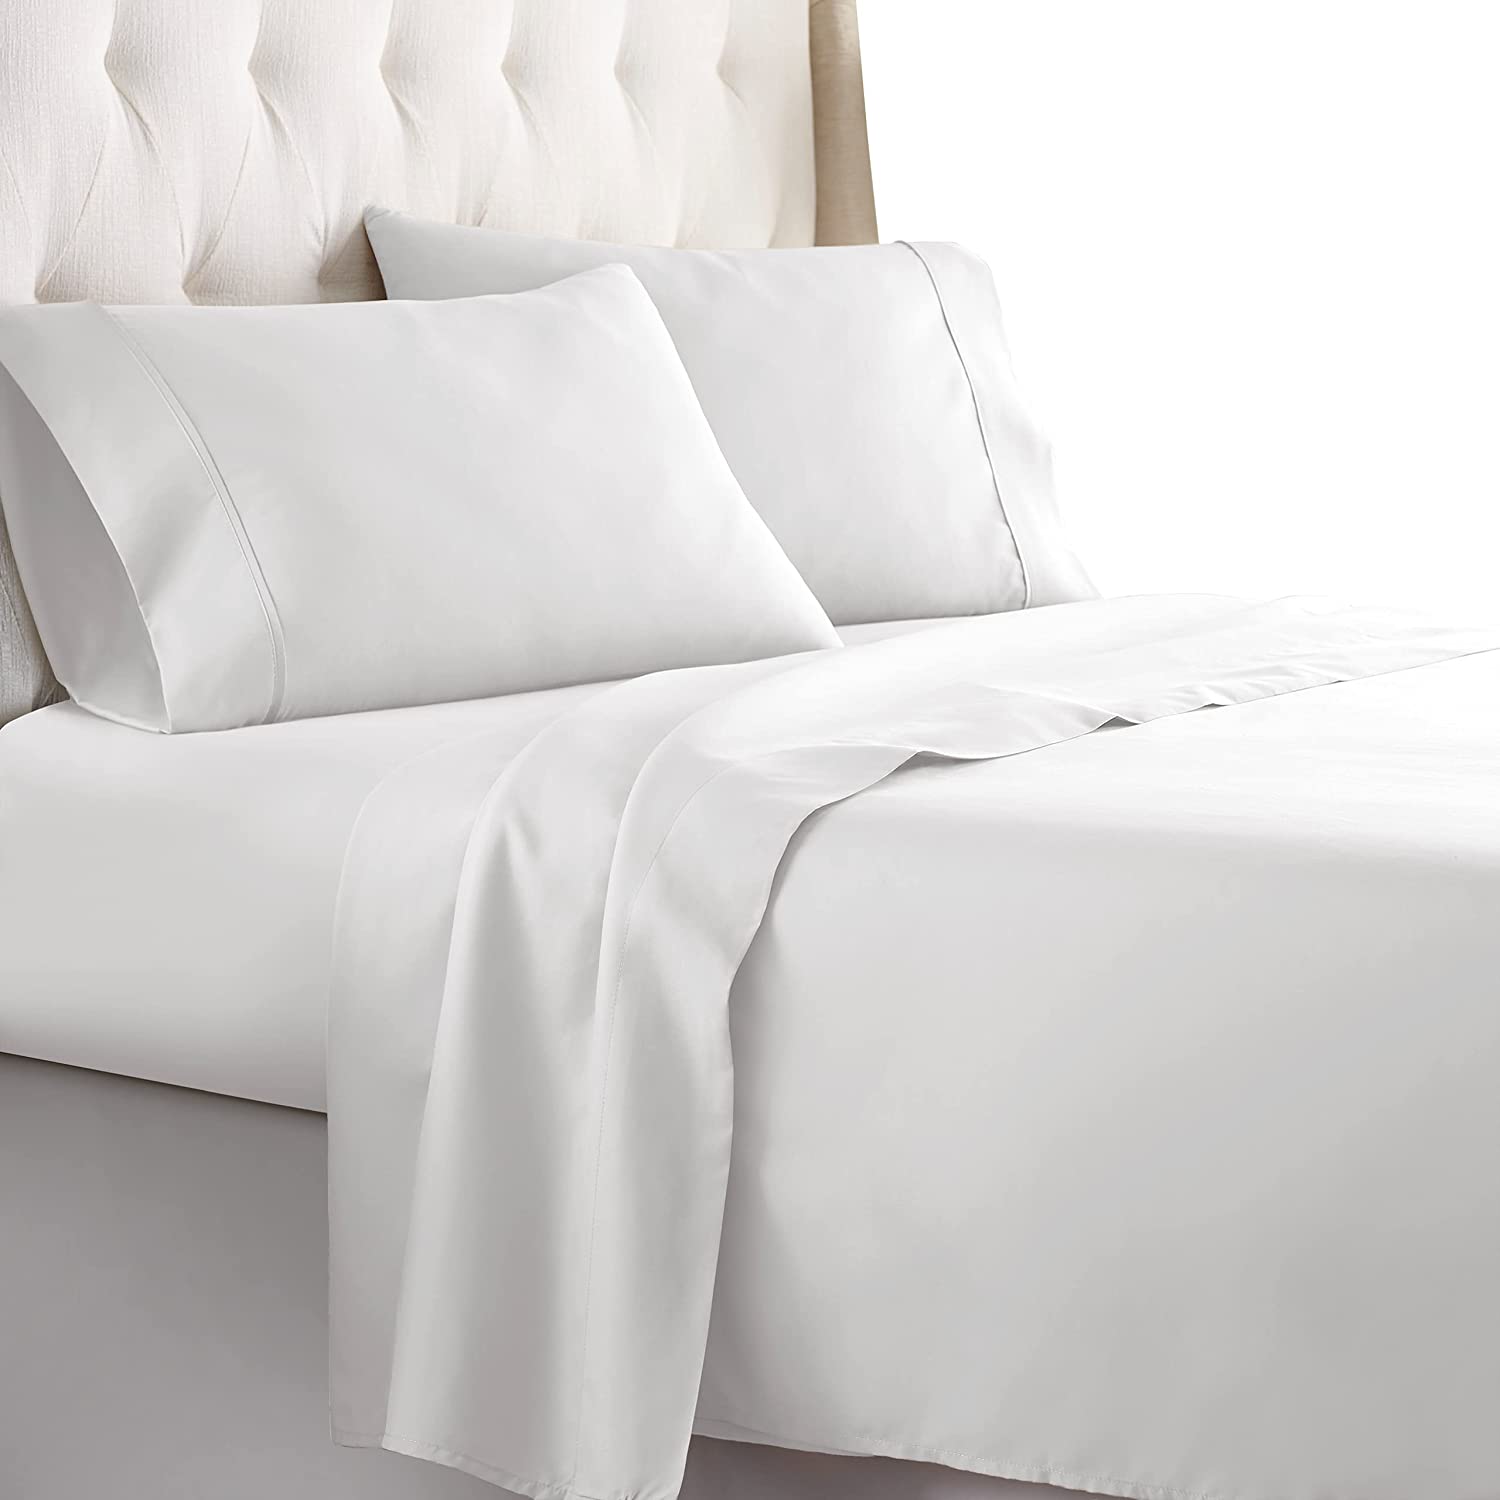 HC Collection Twin Bed Sheets Set - Hotel Luxury, Lightweight, Soft Cooling  Bedd